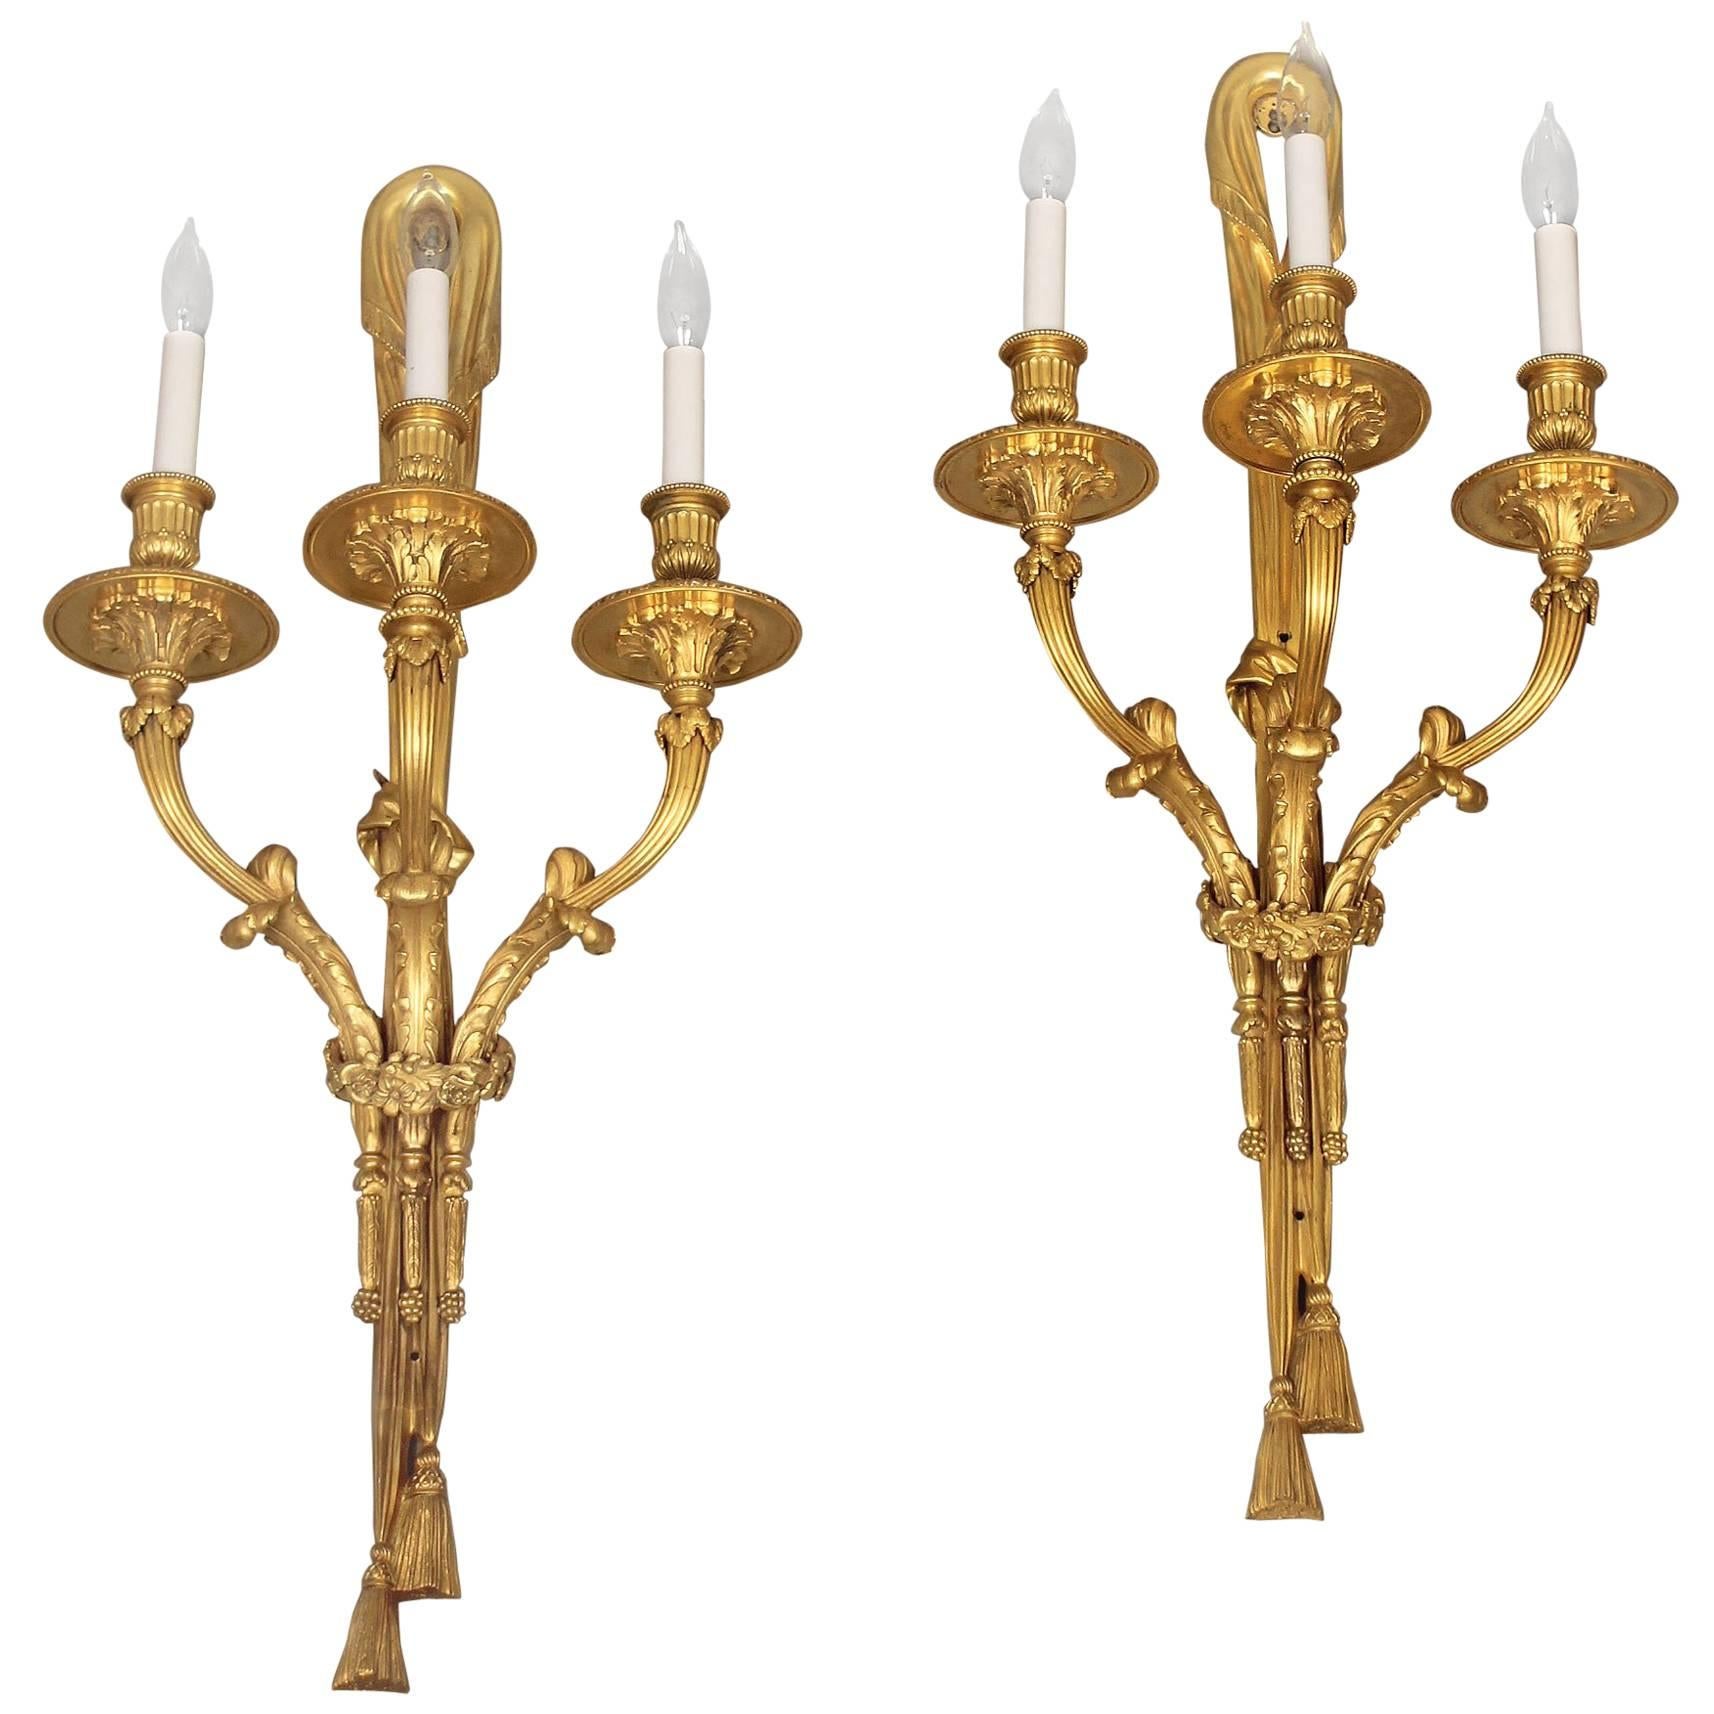 Excellent Pair of Early 20th Century Gilt Bronze Sconces by Caldwell